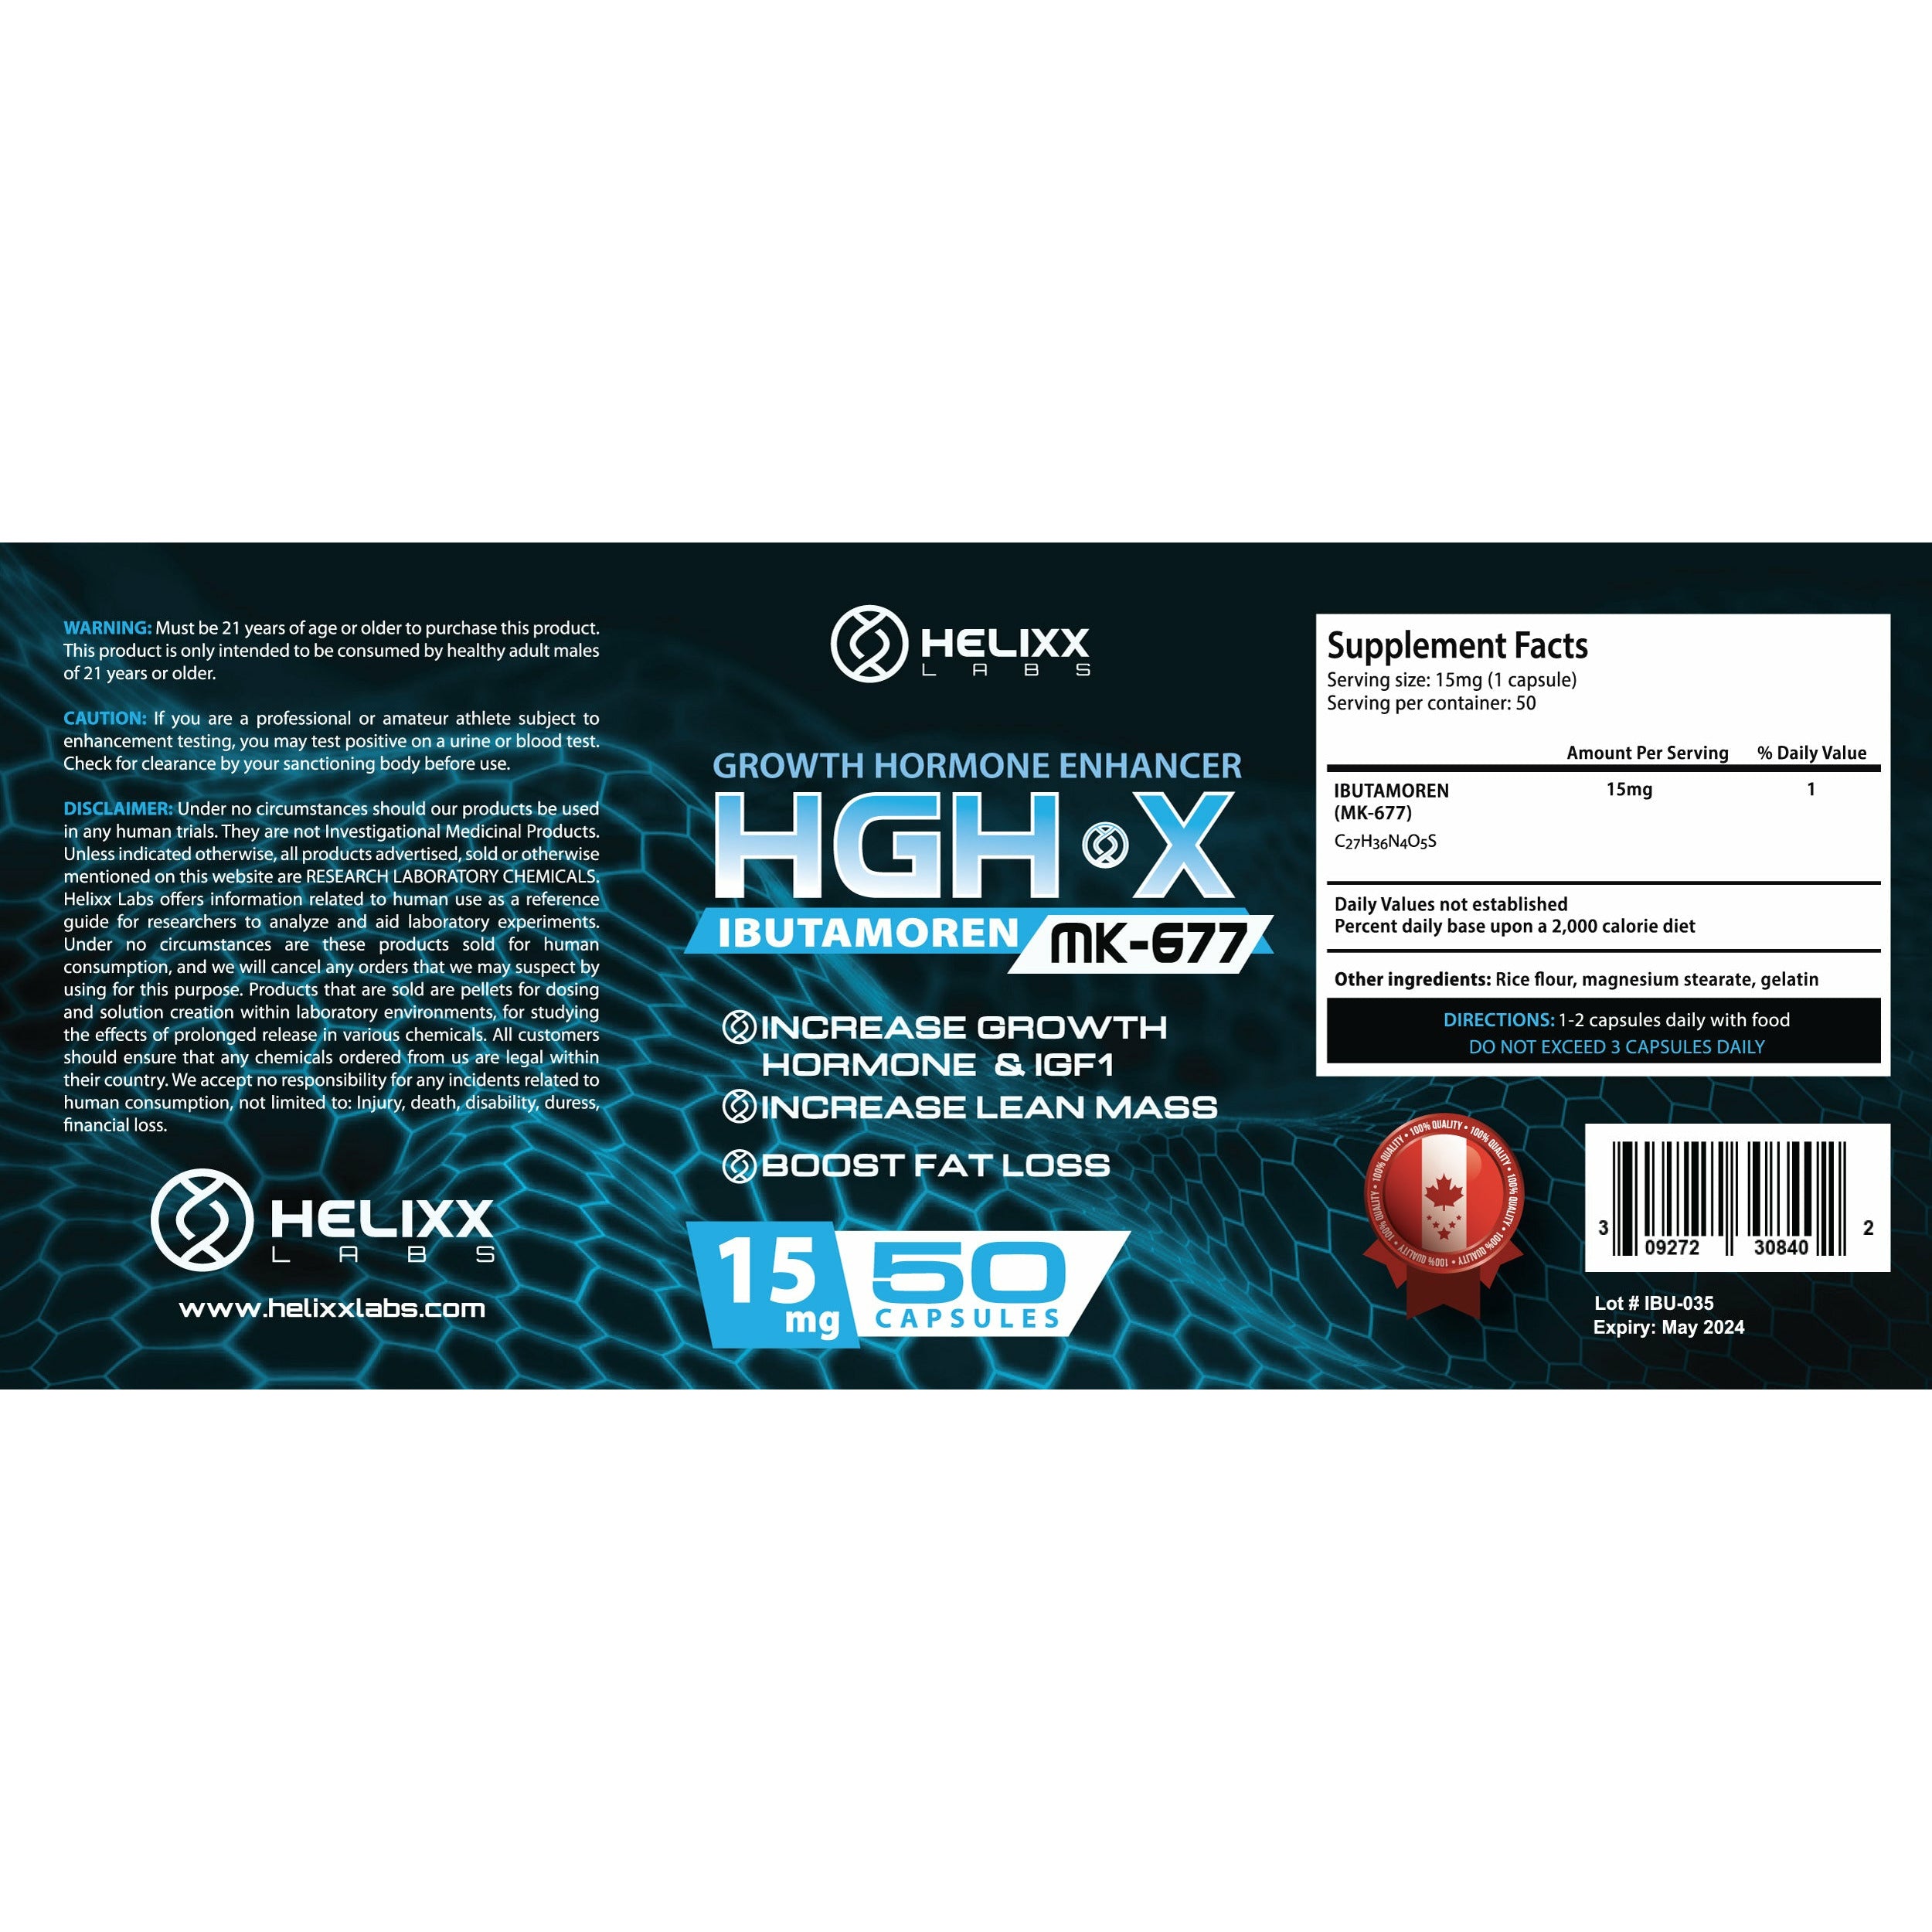 Helixx HGH X 15mg – 50 capsules BEST BY MAY 2024 Helixx Top Nutrition Canada